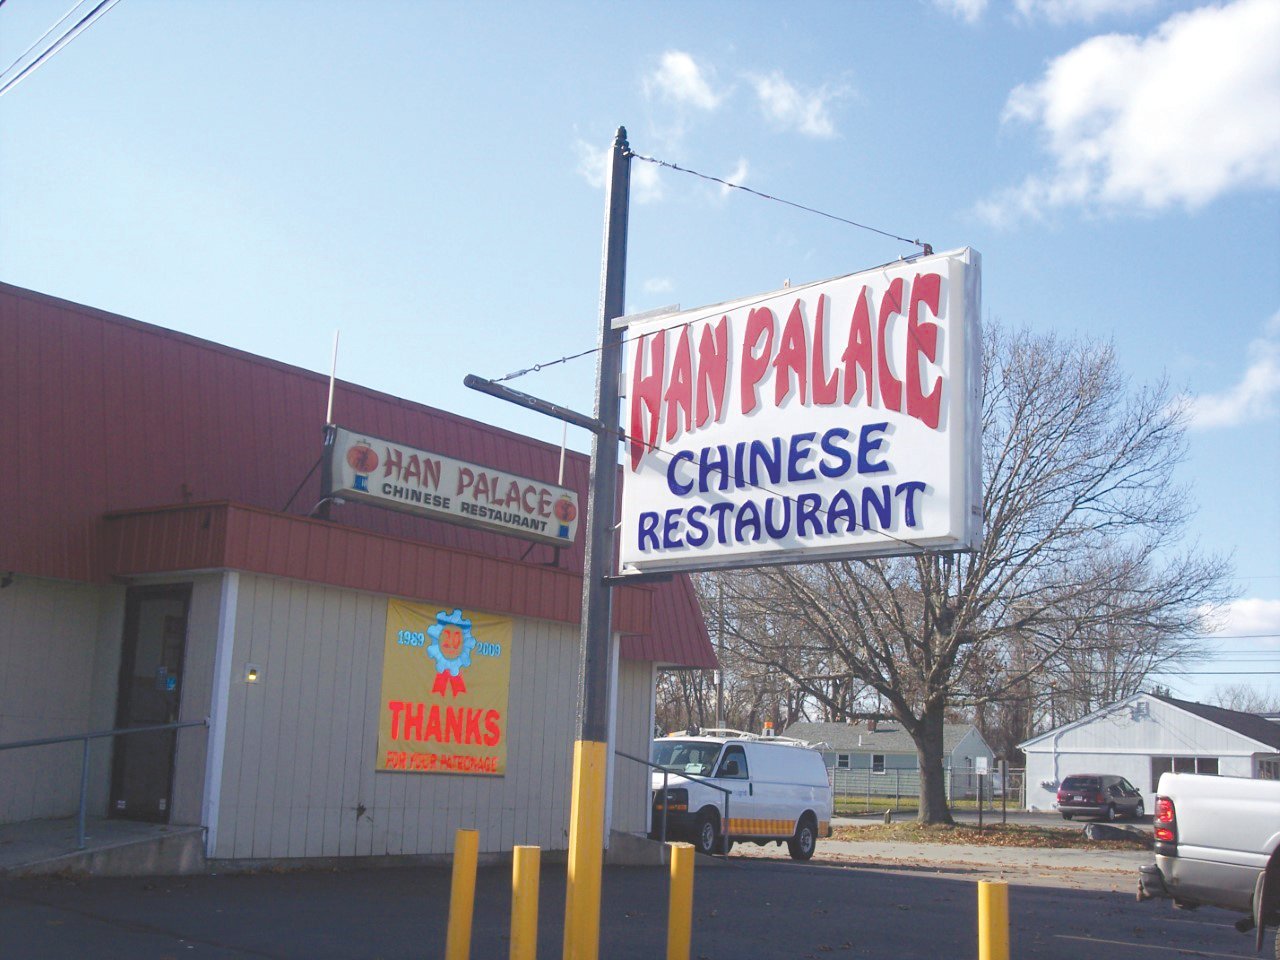 For consistently delicious Chinese food, come to this popular destination on West Shore Road where Han Palace has stood for over three decades.   Come to Han Palace to see (and taste) what all the talk is about.